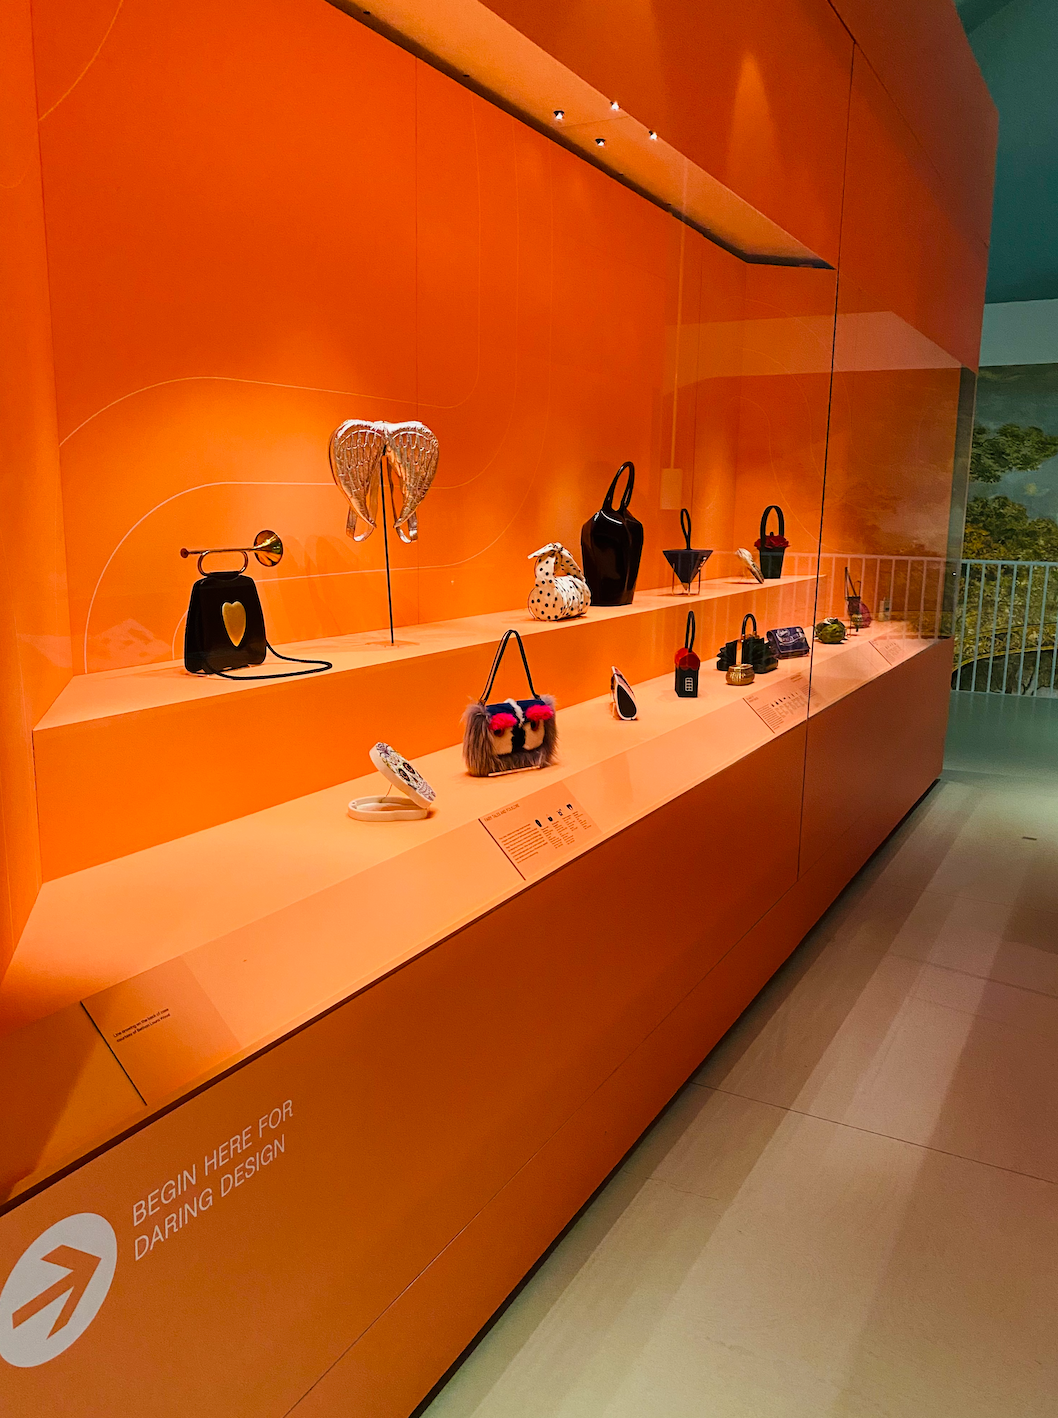 V&A Exhibition Review: Bags Inside Out, by Jordine Bartlett